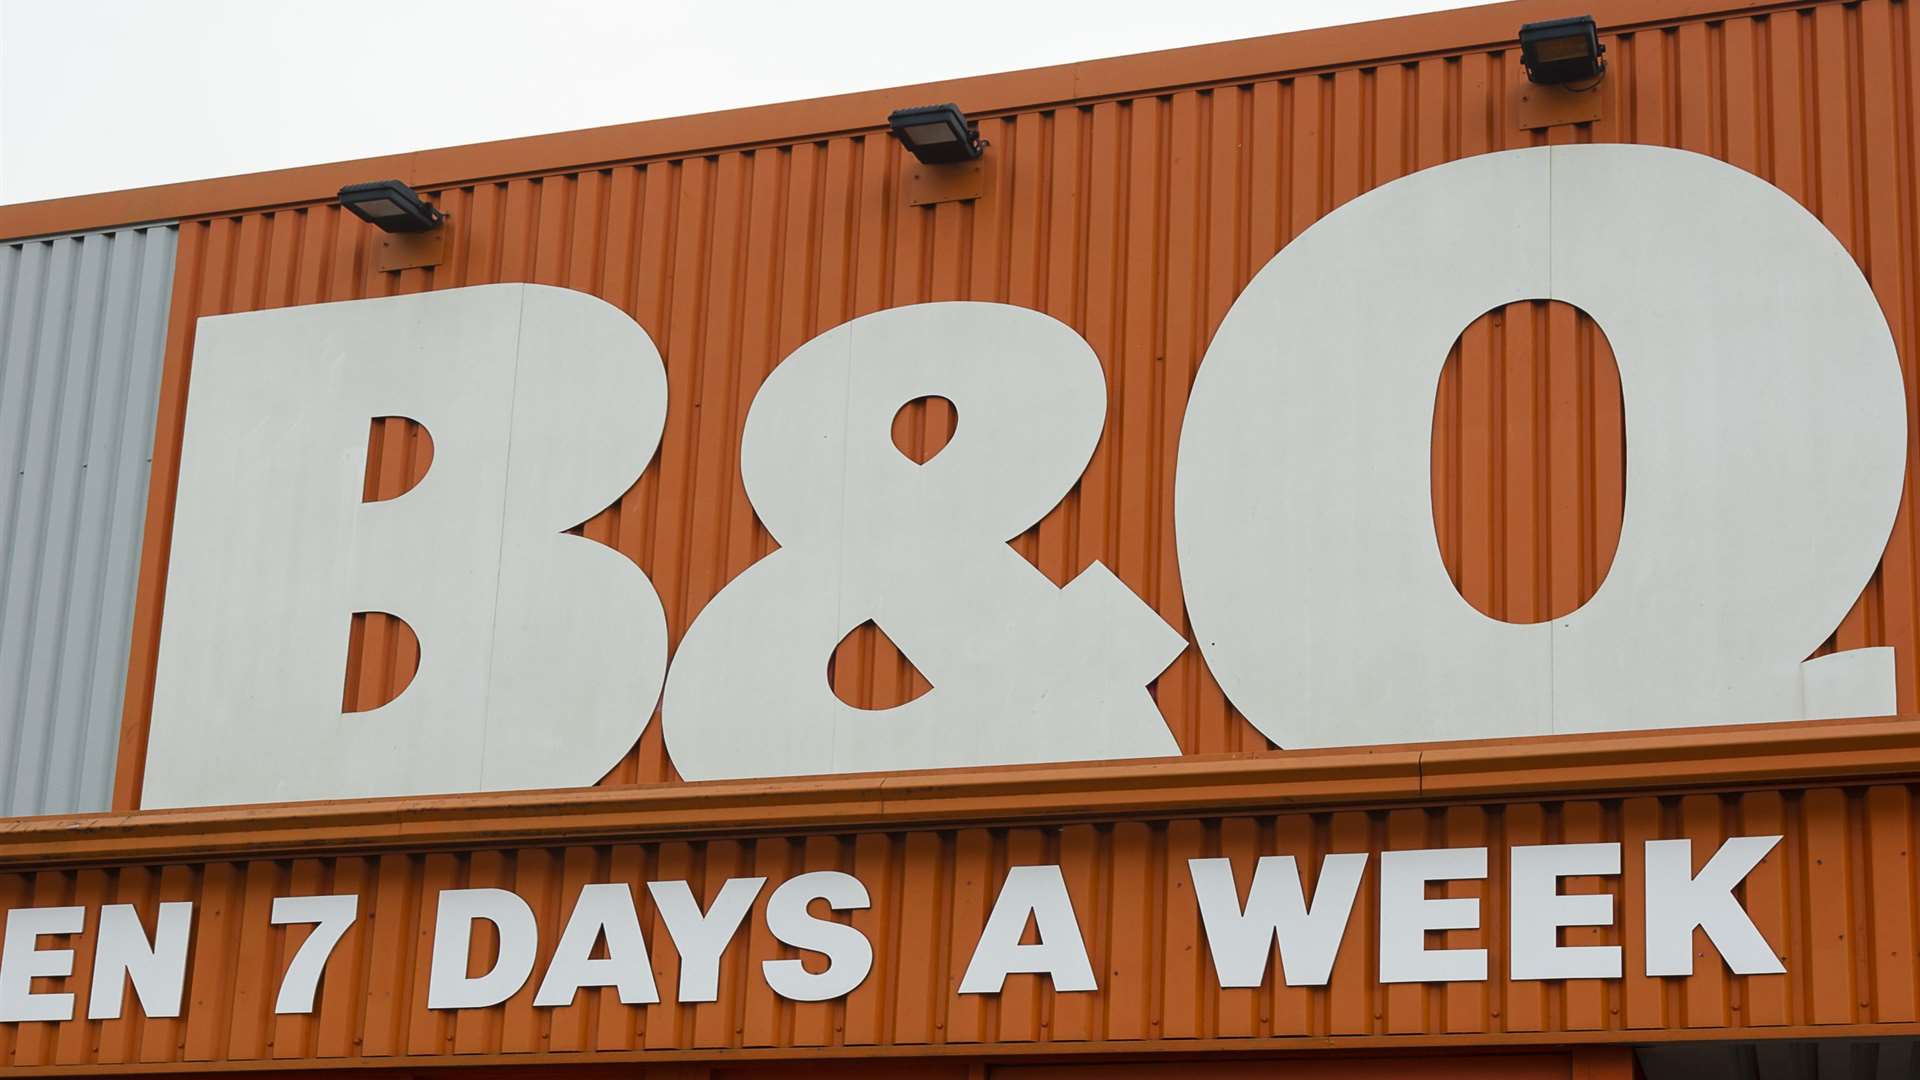 A man was arrested on suspicion of possessing a knuckle duster in Sturry B&Q